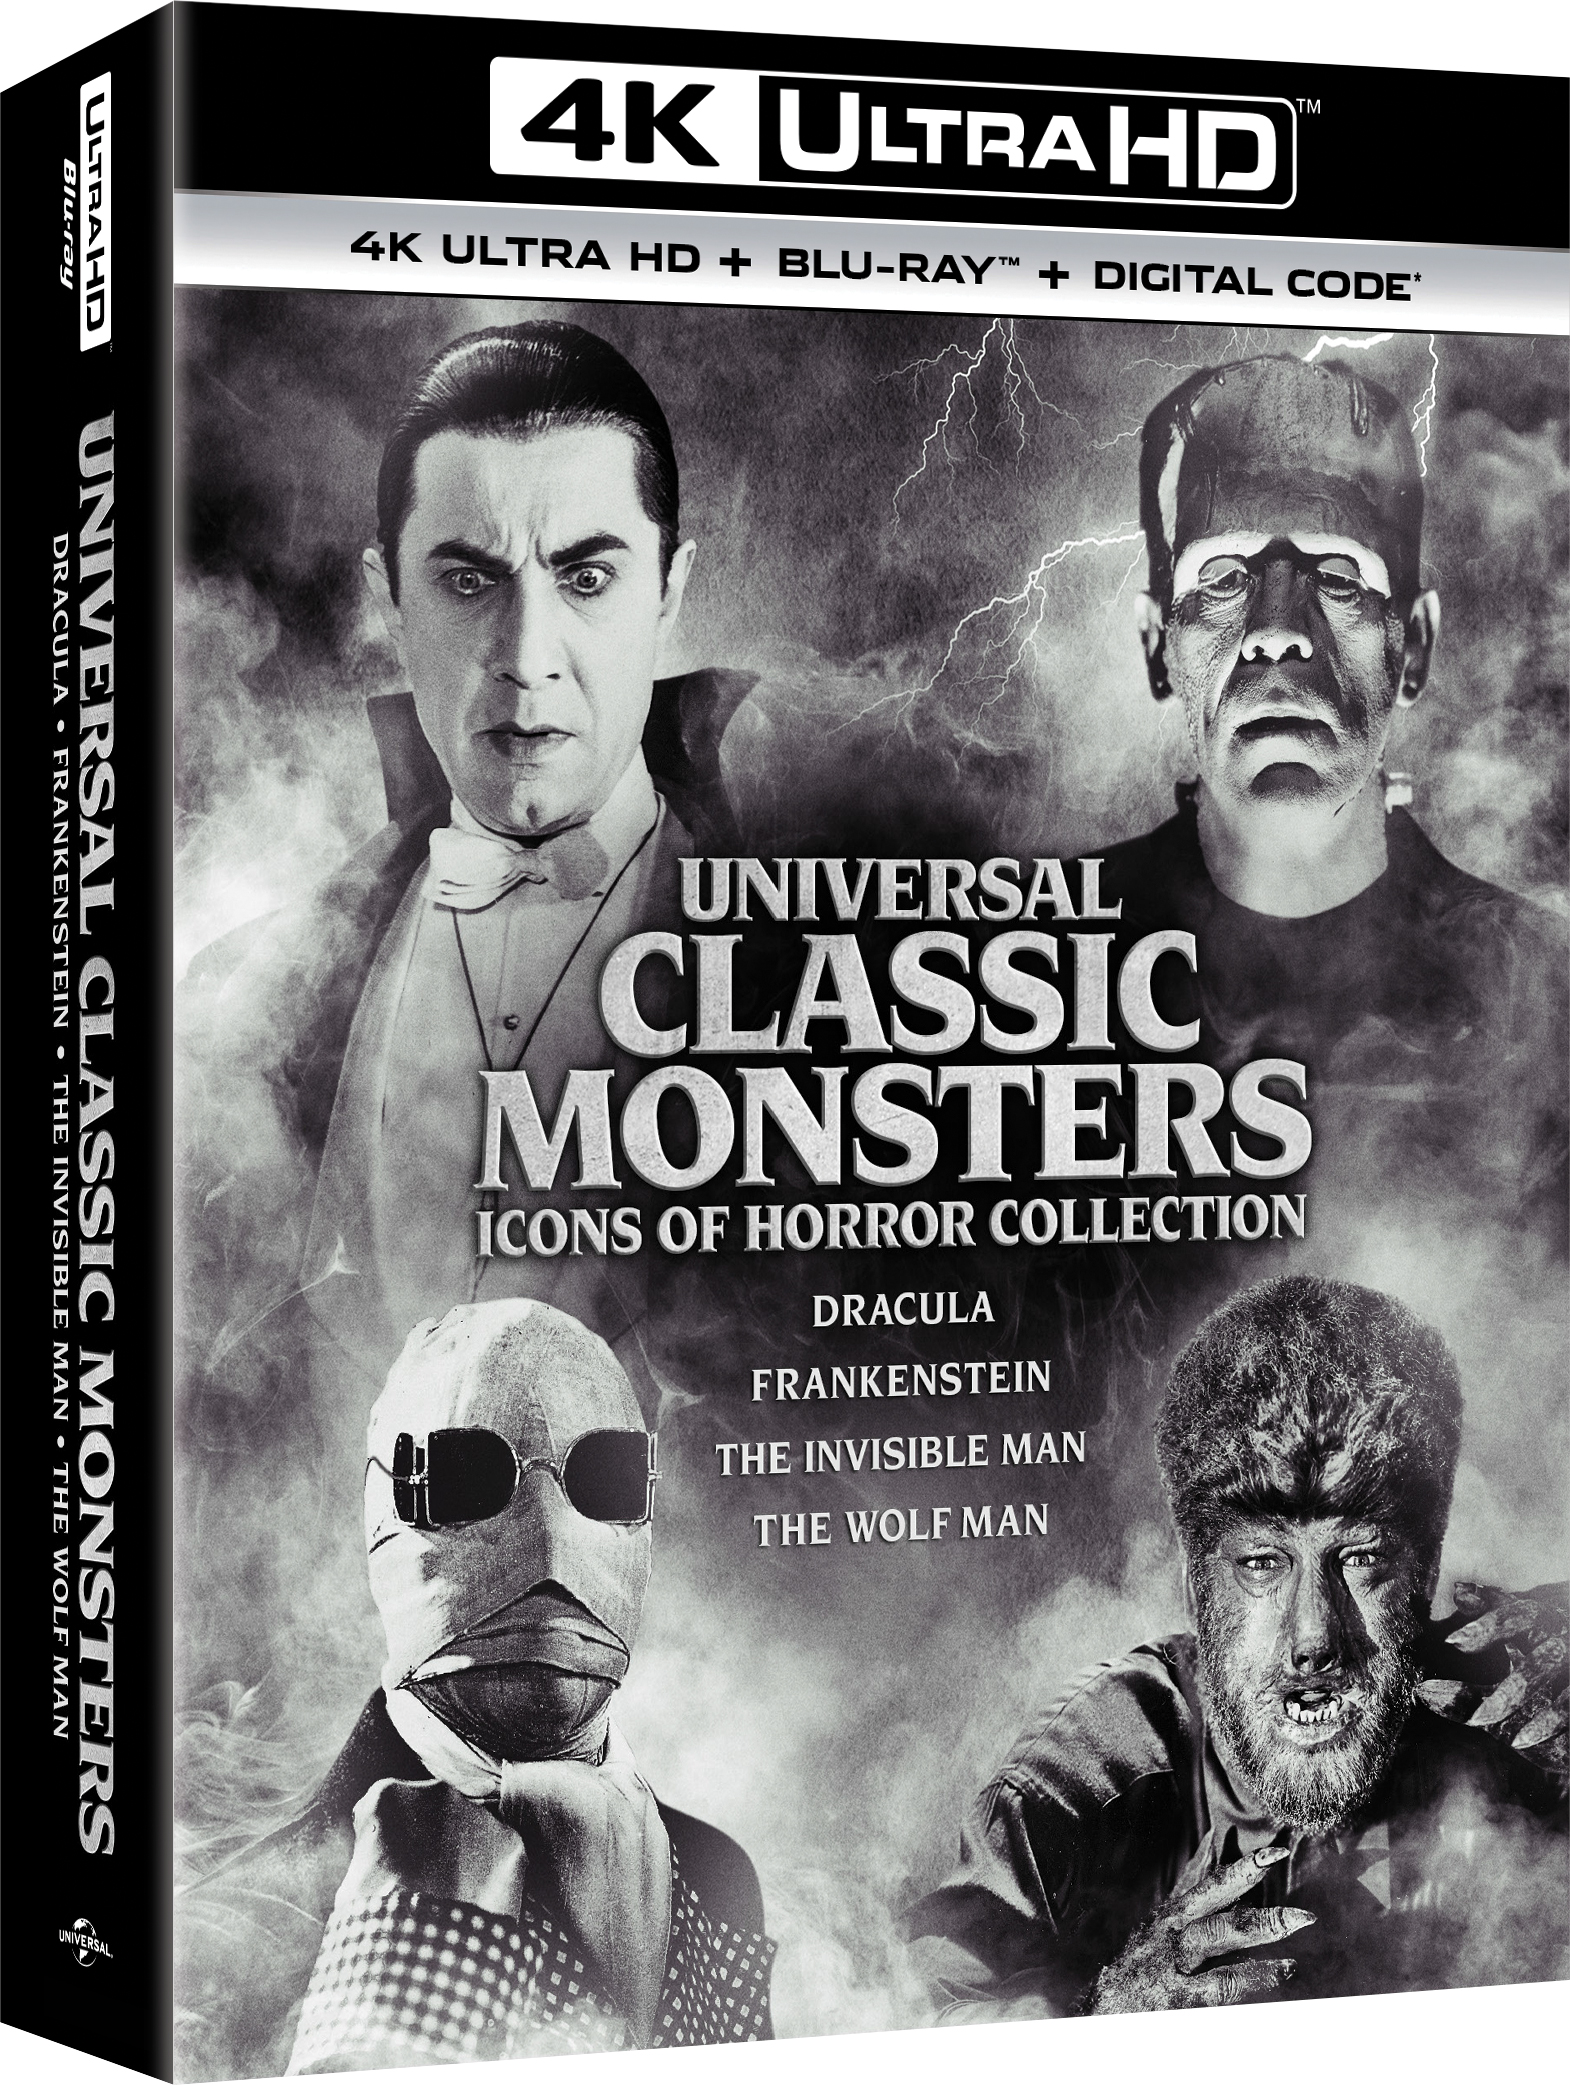 Universal Classic Monsters Icons of Horror Collection 4K UHD